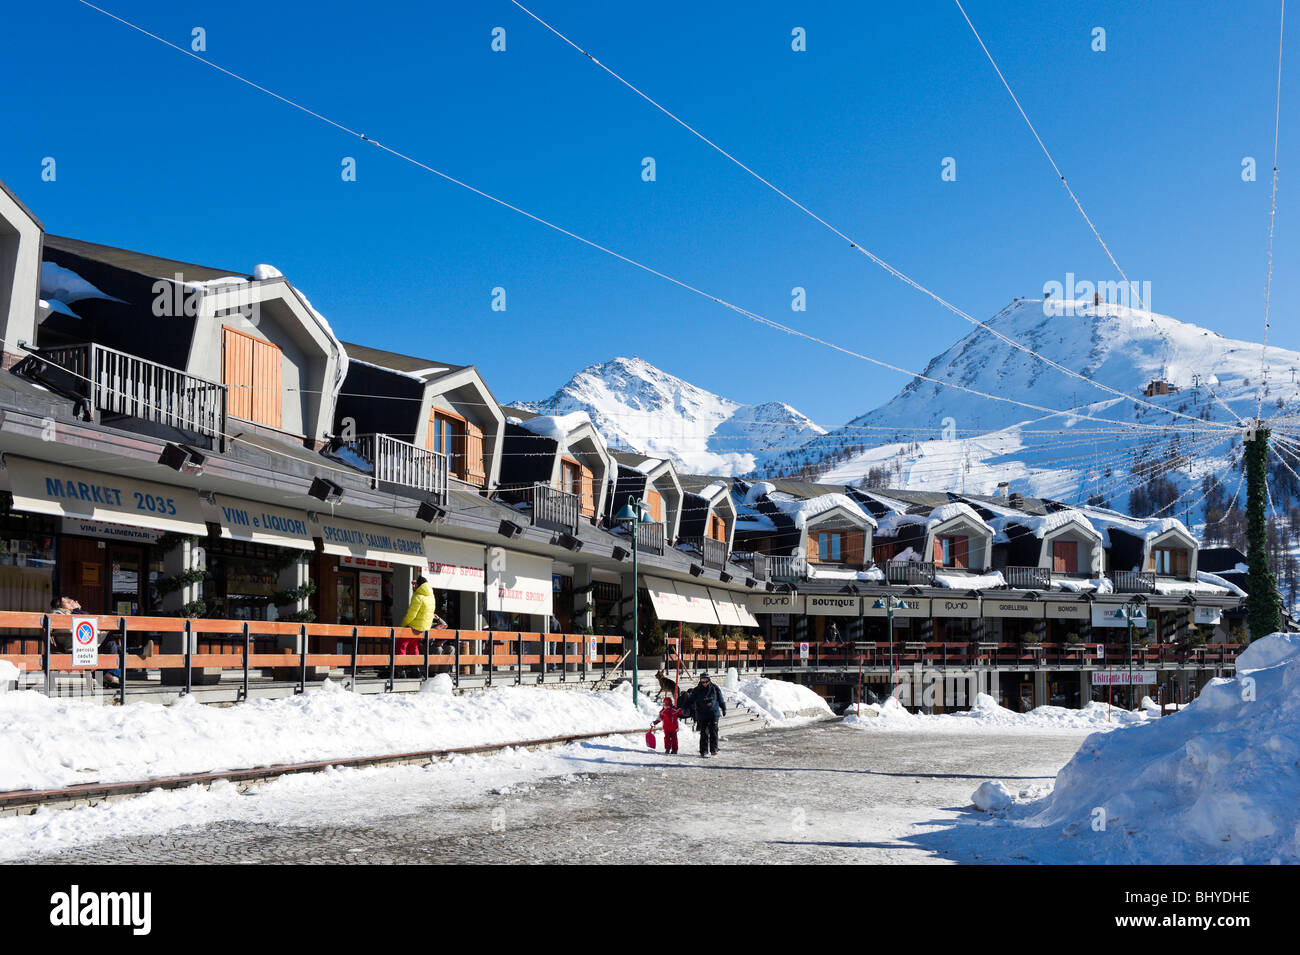 Shops in the town centre, Sestriere, Milky Way ski area, Italy Stock Photo